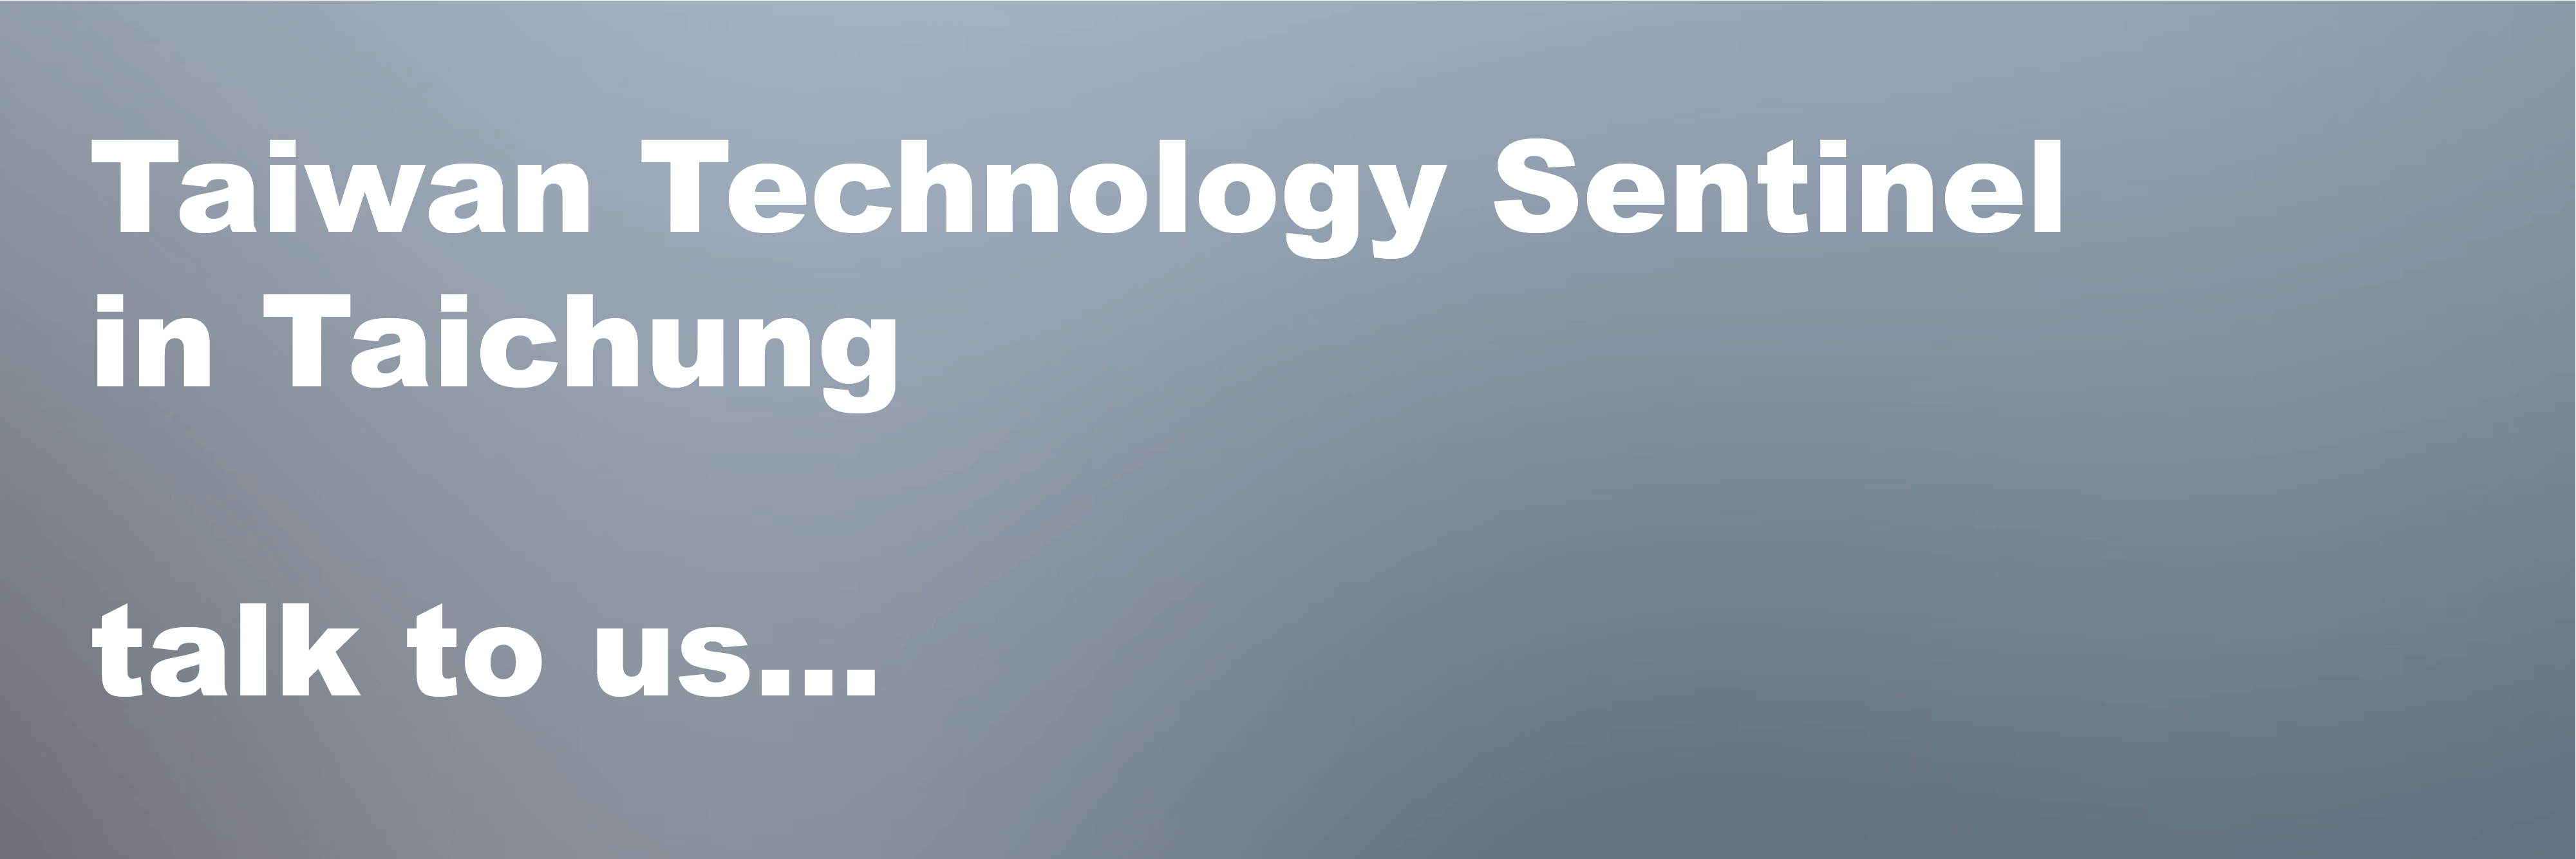 Taiwan Technology Sentinel In Taichung Services Contact